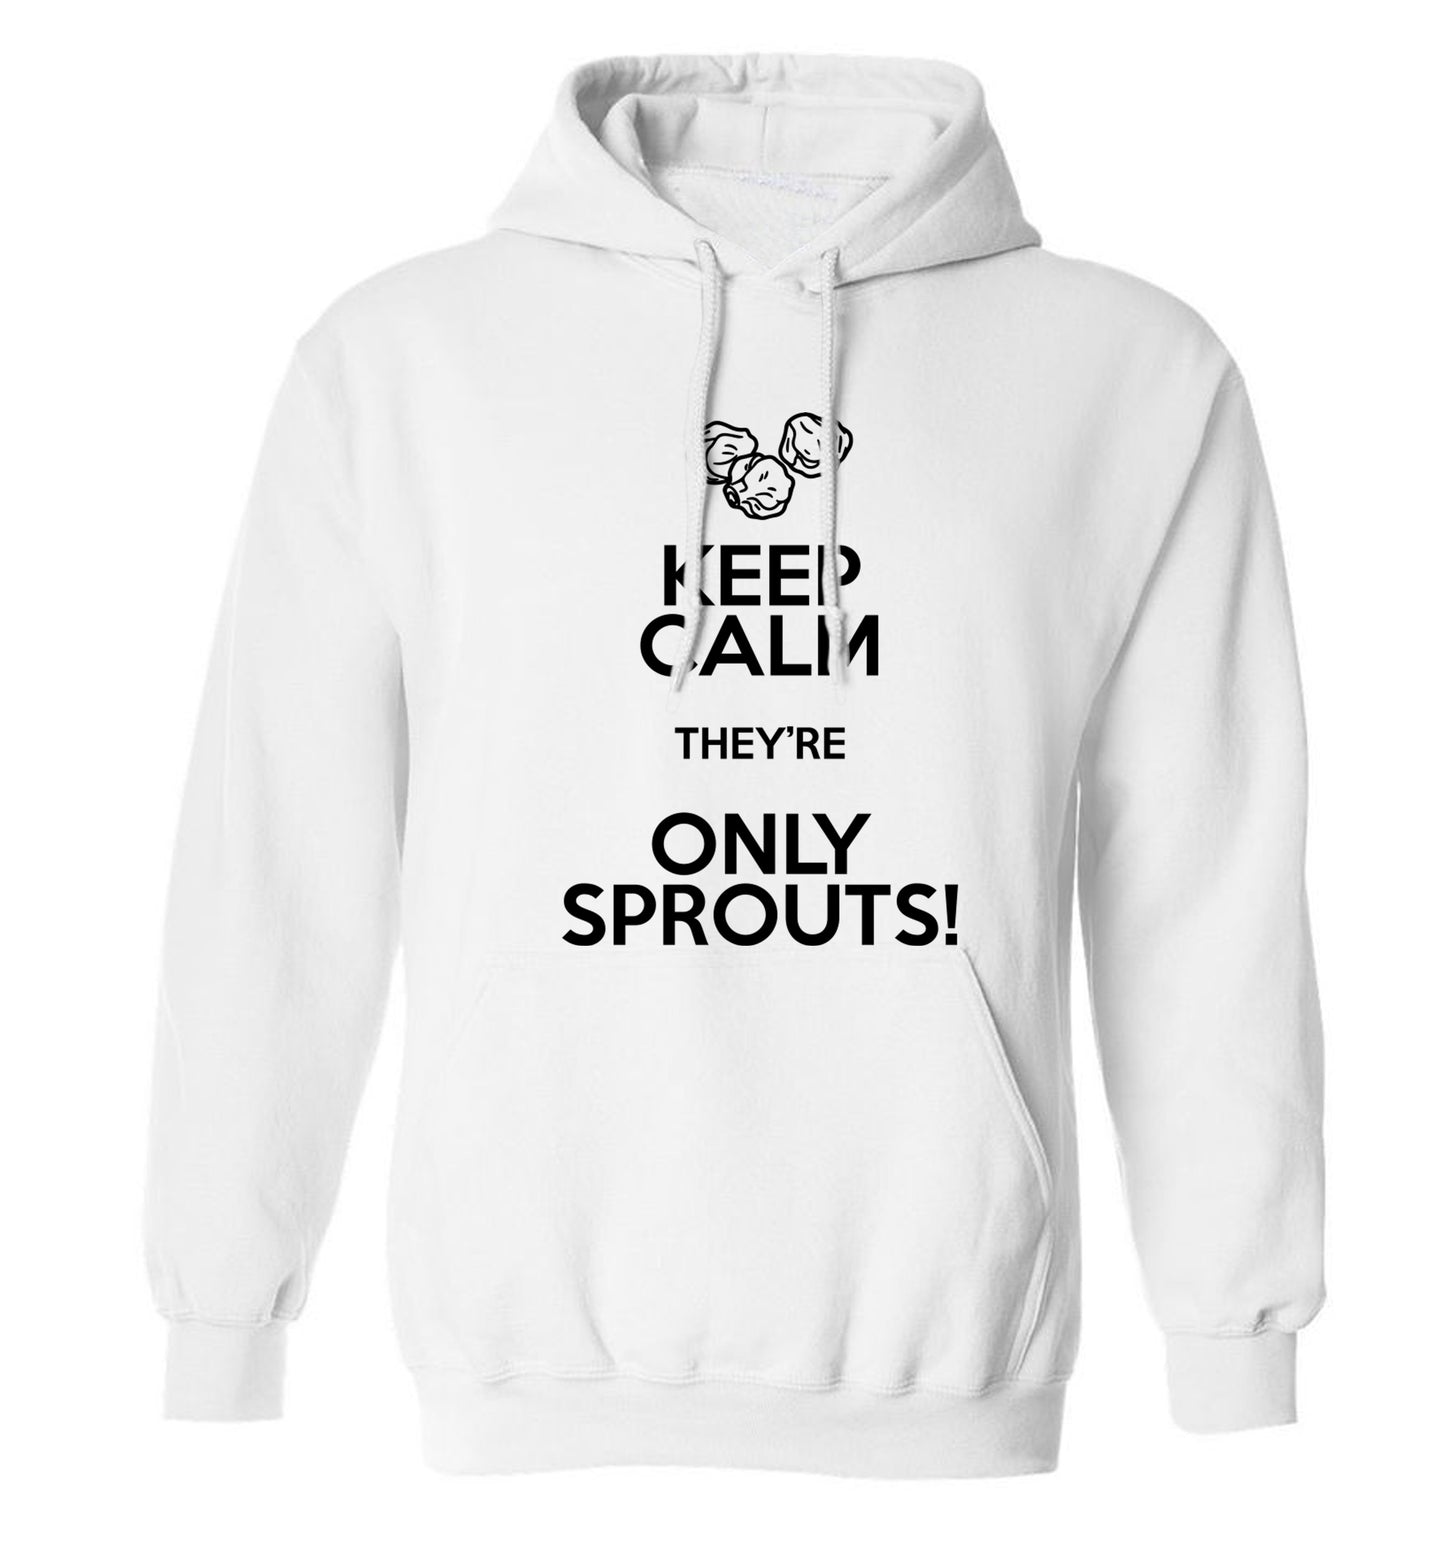 Keep calm they're only sprouts adults unisex white hoodie 2XL